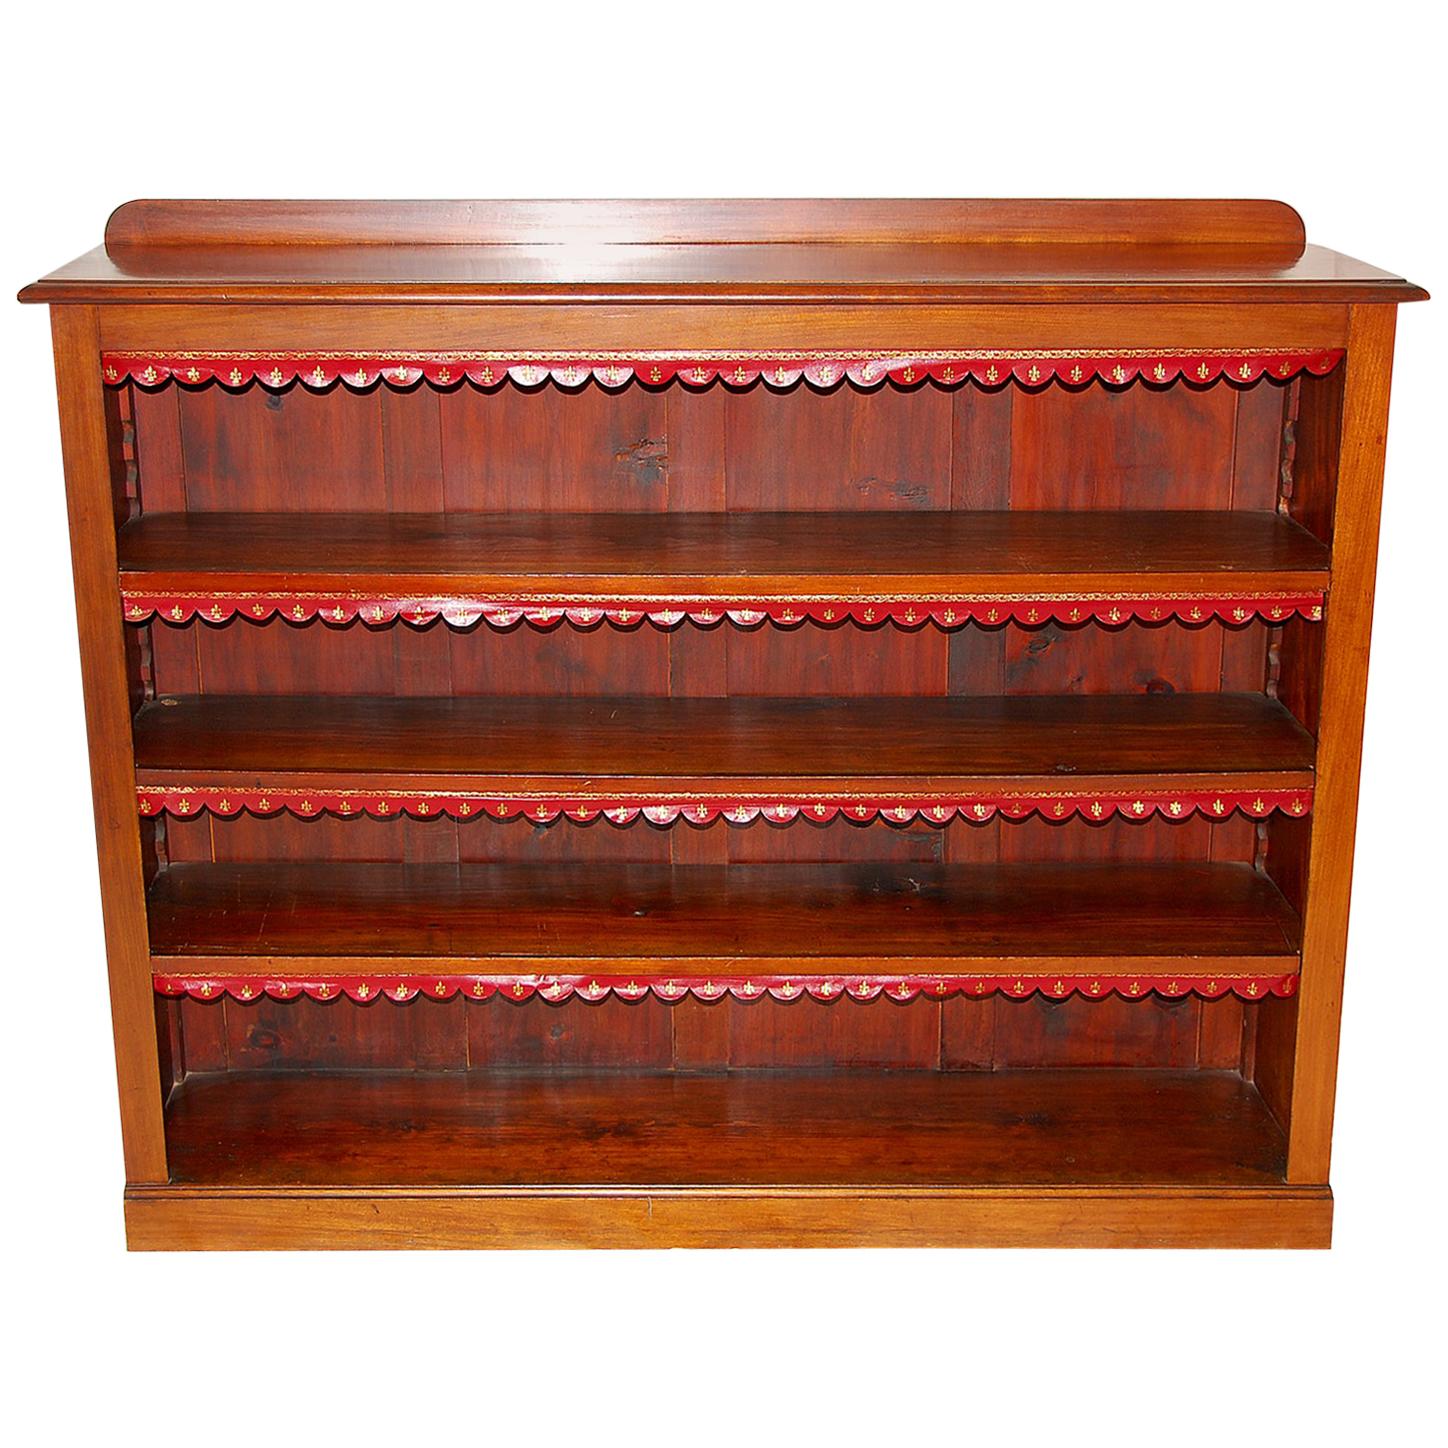 English Victorian Mahogany Bookcase with Adjustable Shelves and Leather Edgings